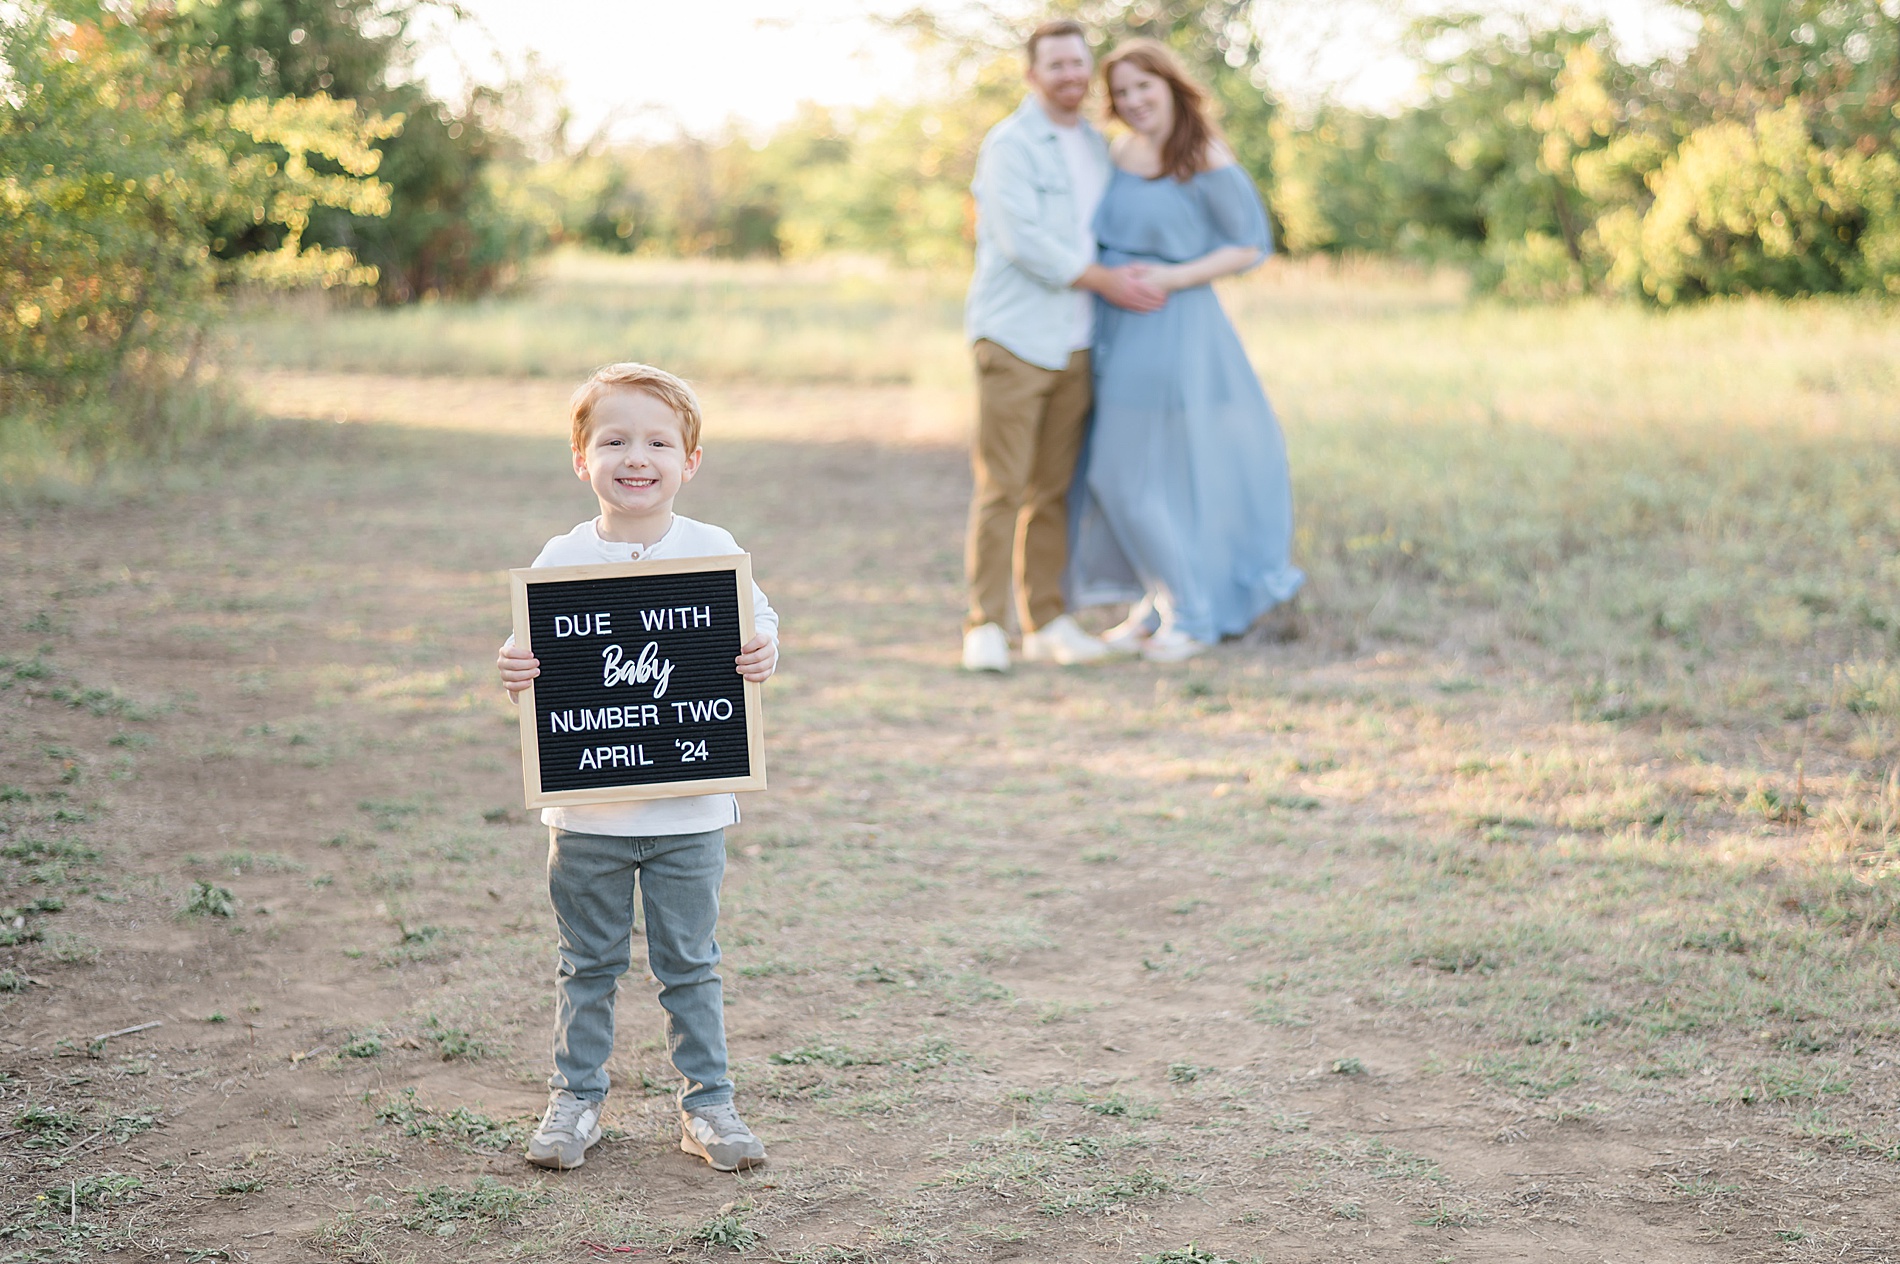 boy holds up sign during pregnancy announcement photoshoot photographed by Lindsey Dutton Photography, a Dallas maternity photographer
